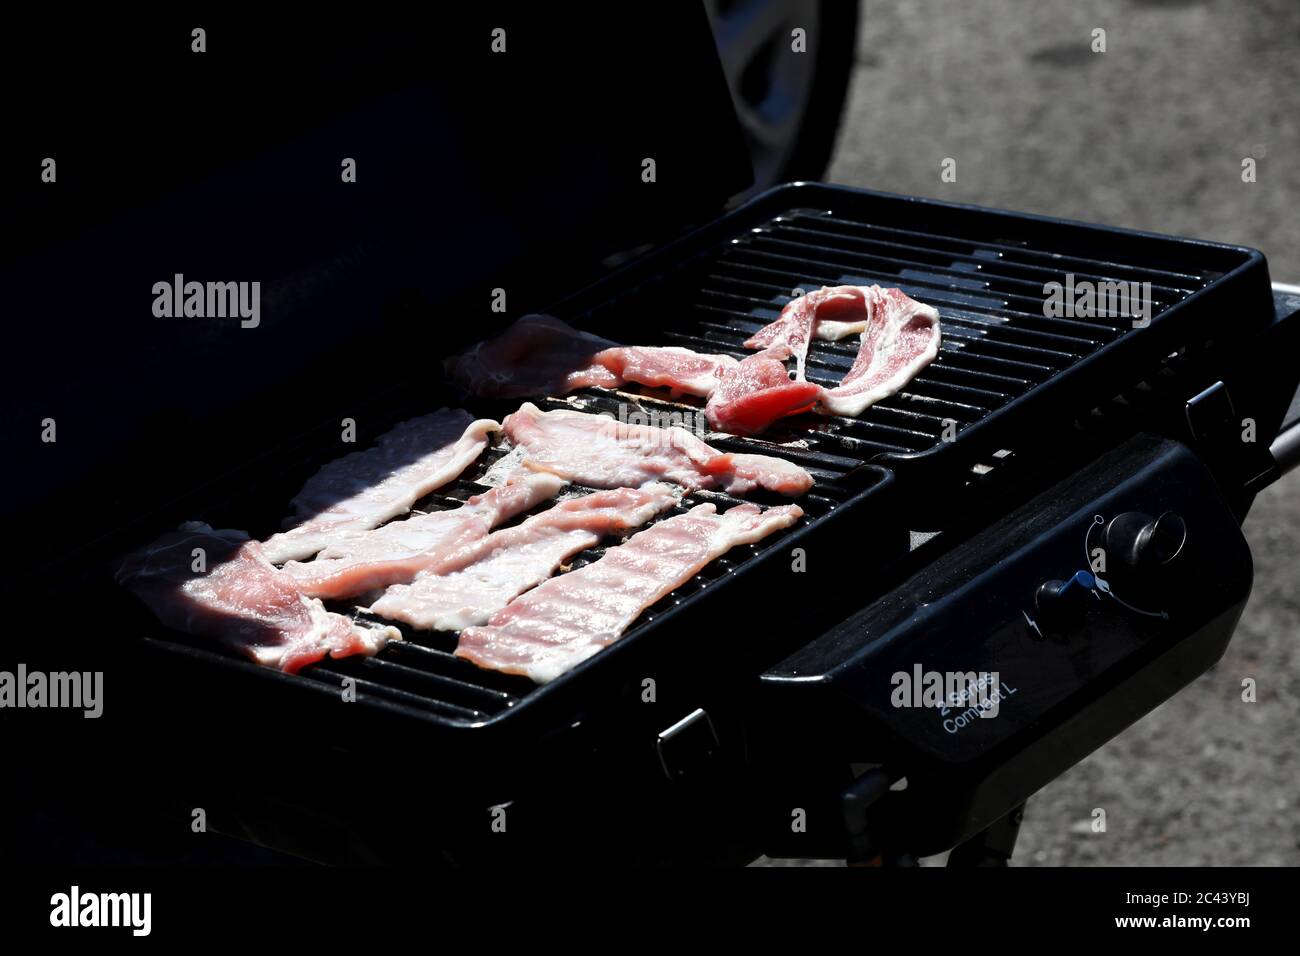 Bacon being cooked on a portable stove in Brighton, East Sussex, UK. Stock Photo